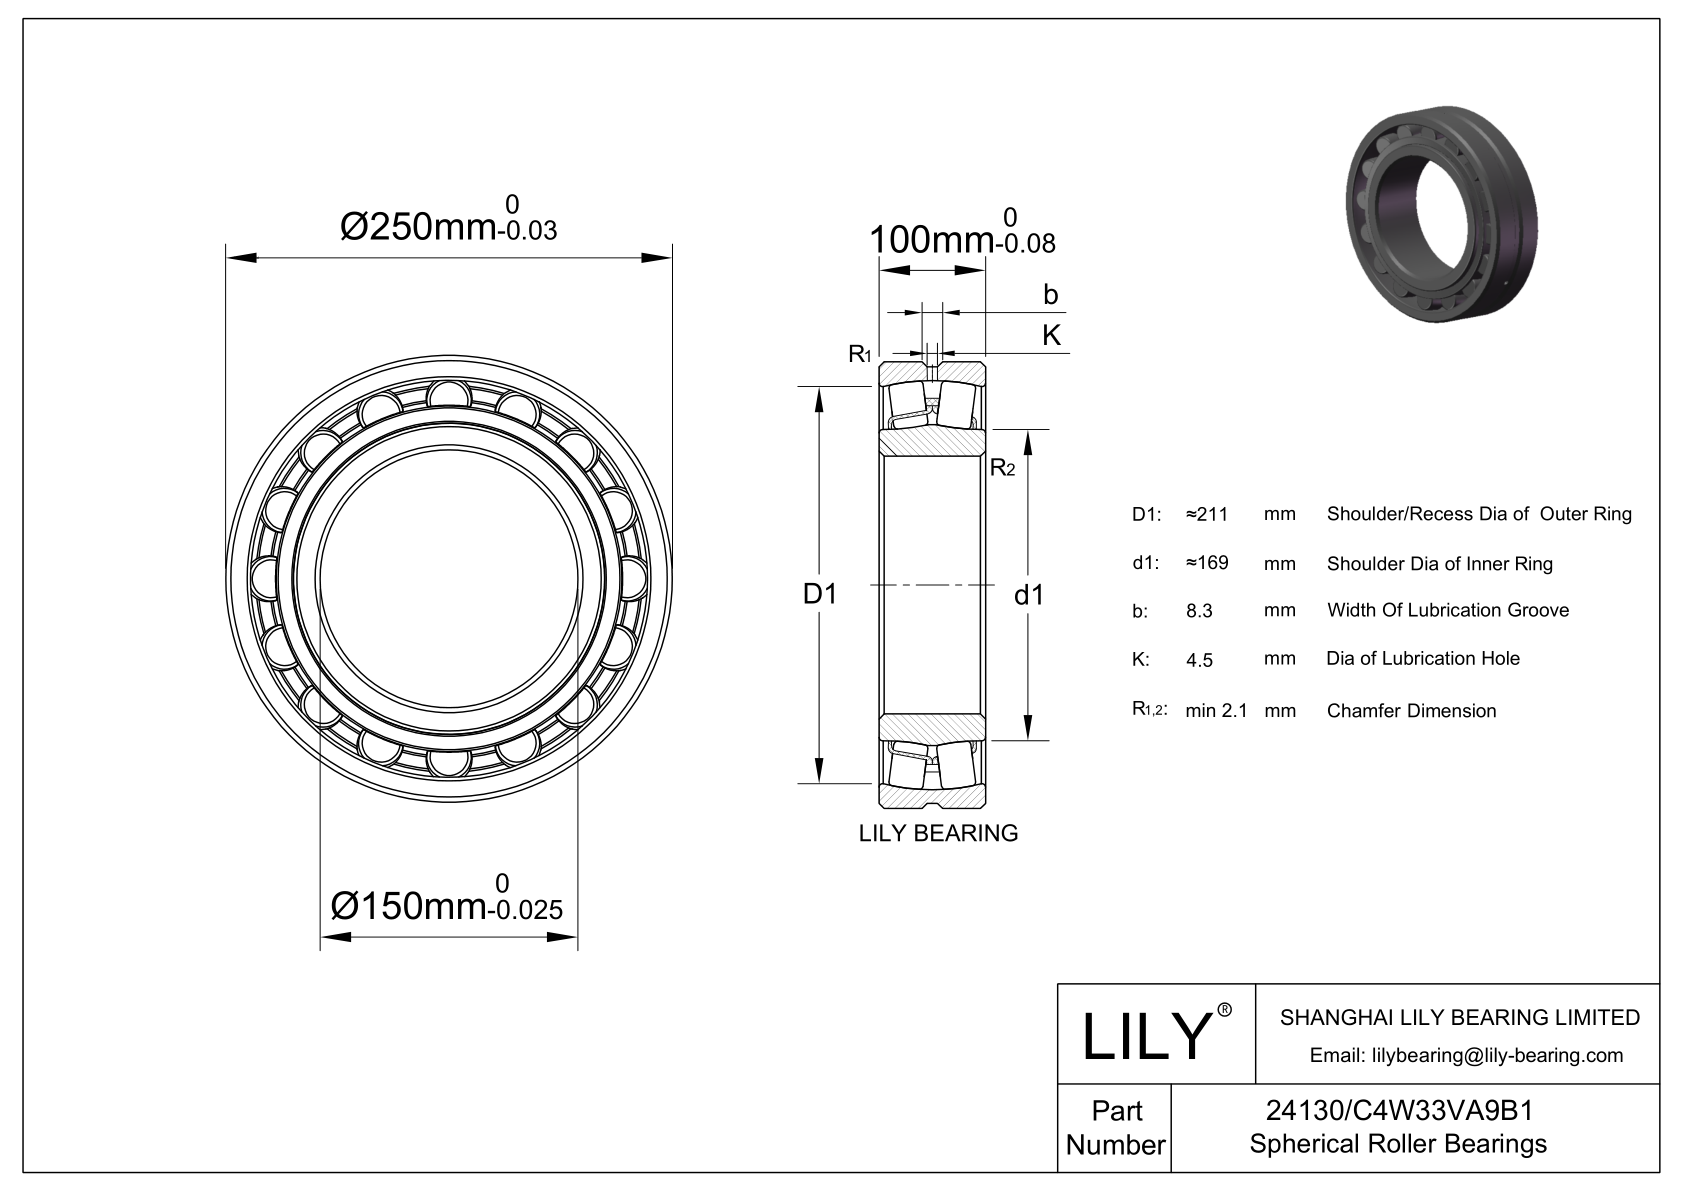 24130/C4W33VA9B1 Double Row Spherical Roller Bearing cad drawing